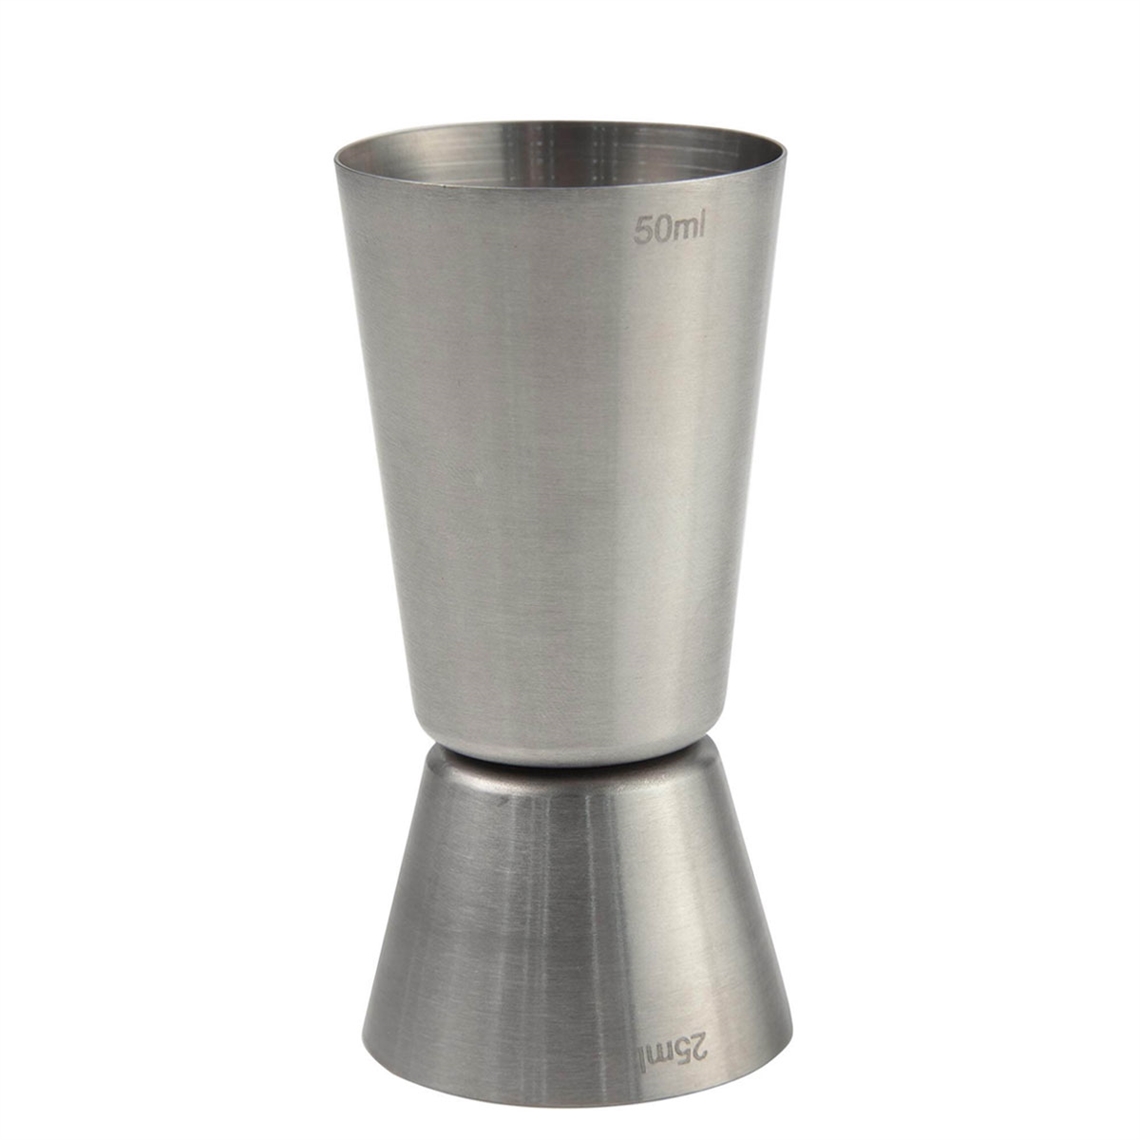 View more spirit and wine bar thimble measures from our Spirit and Wine Bar Thimble Measures range